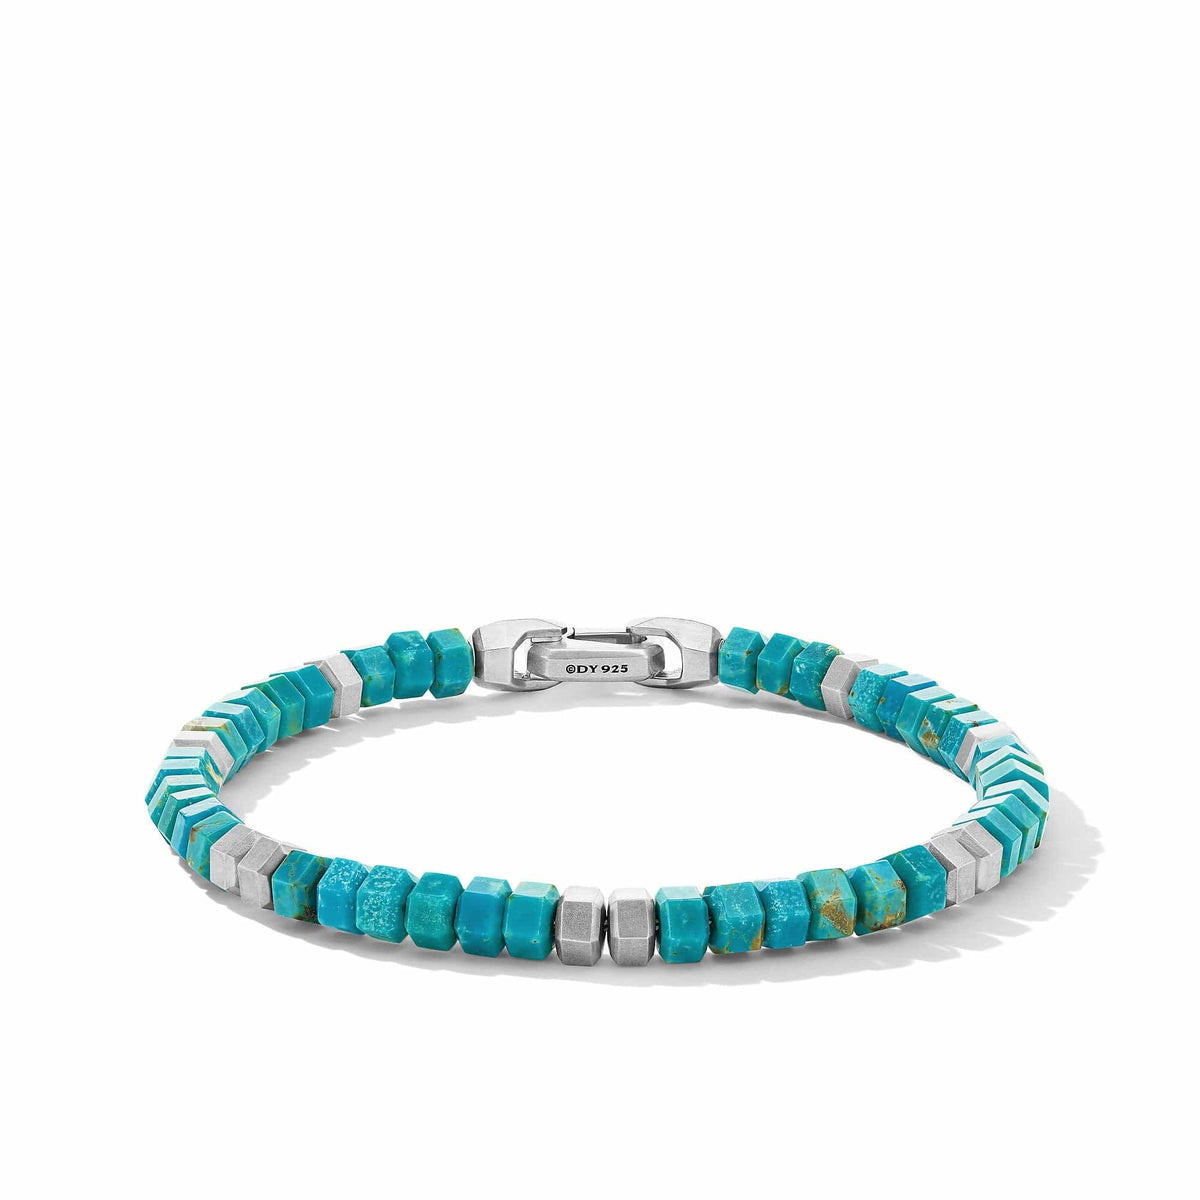 Spiritual Beads Hex Bracelet with Turquoise